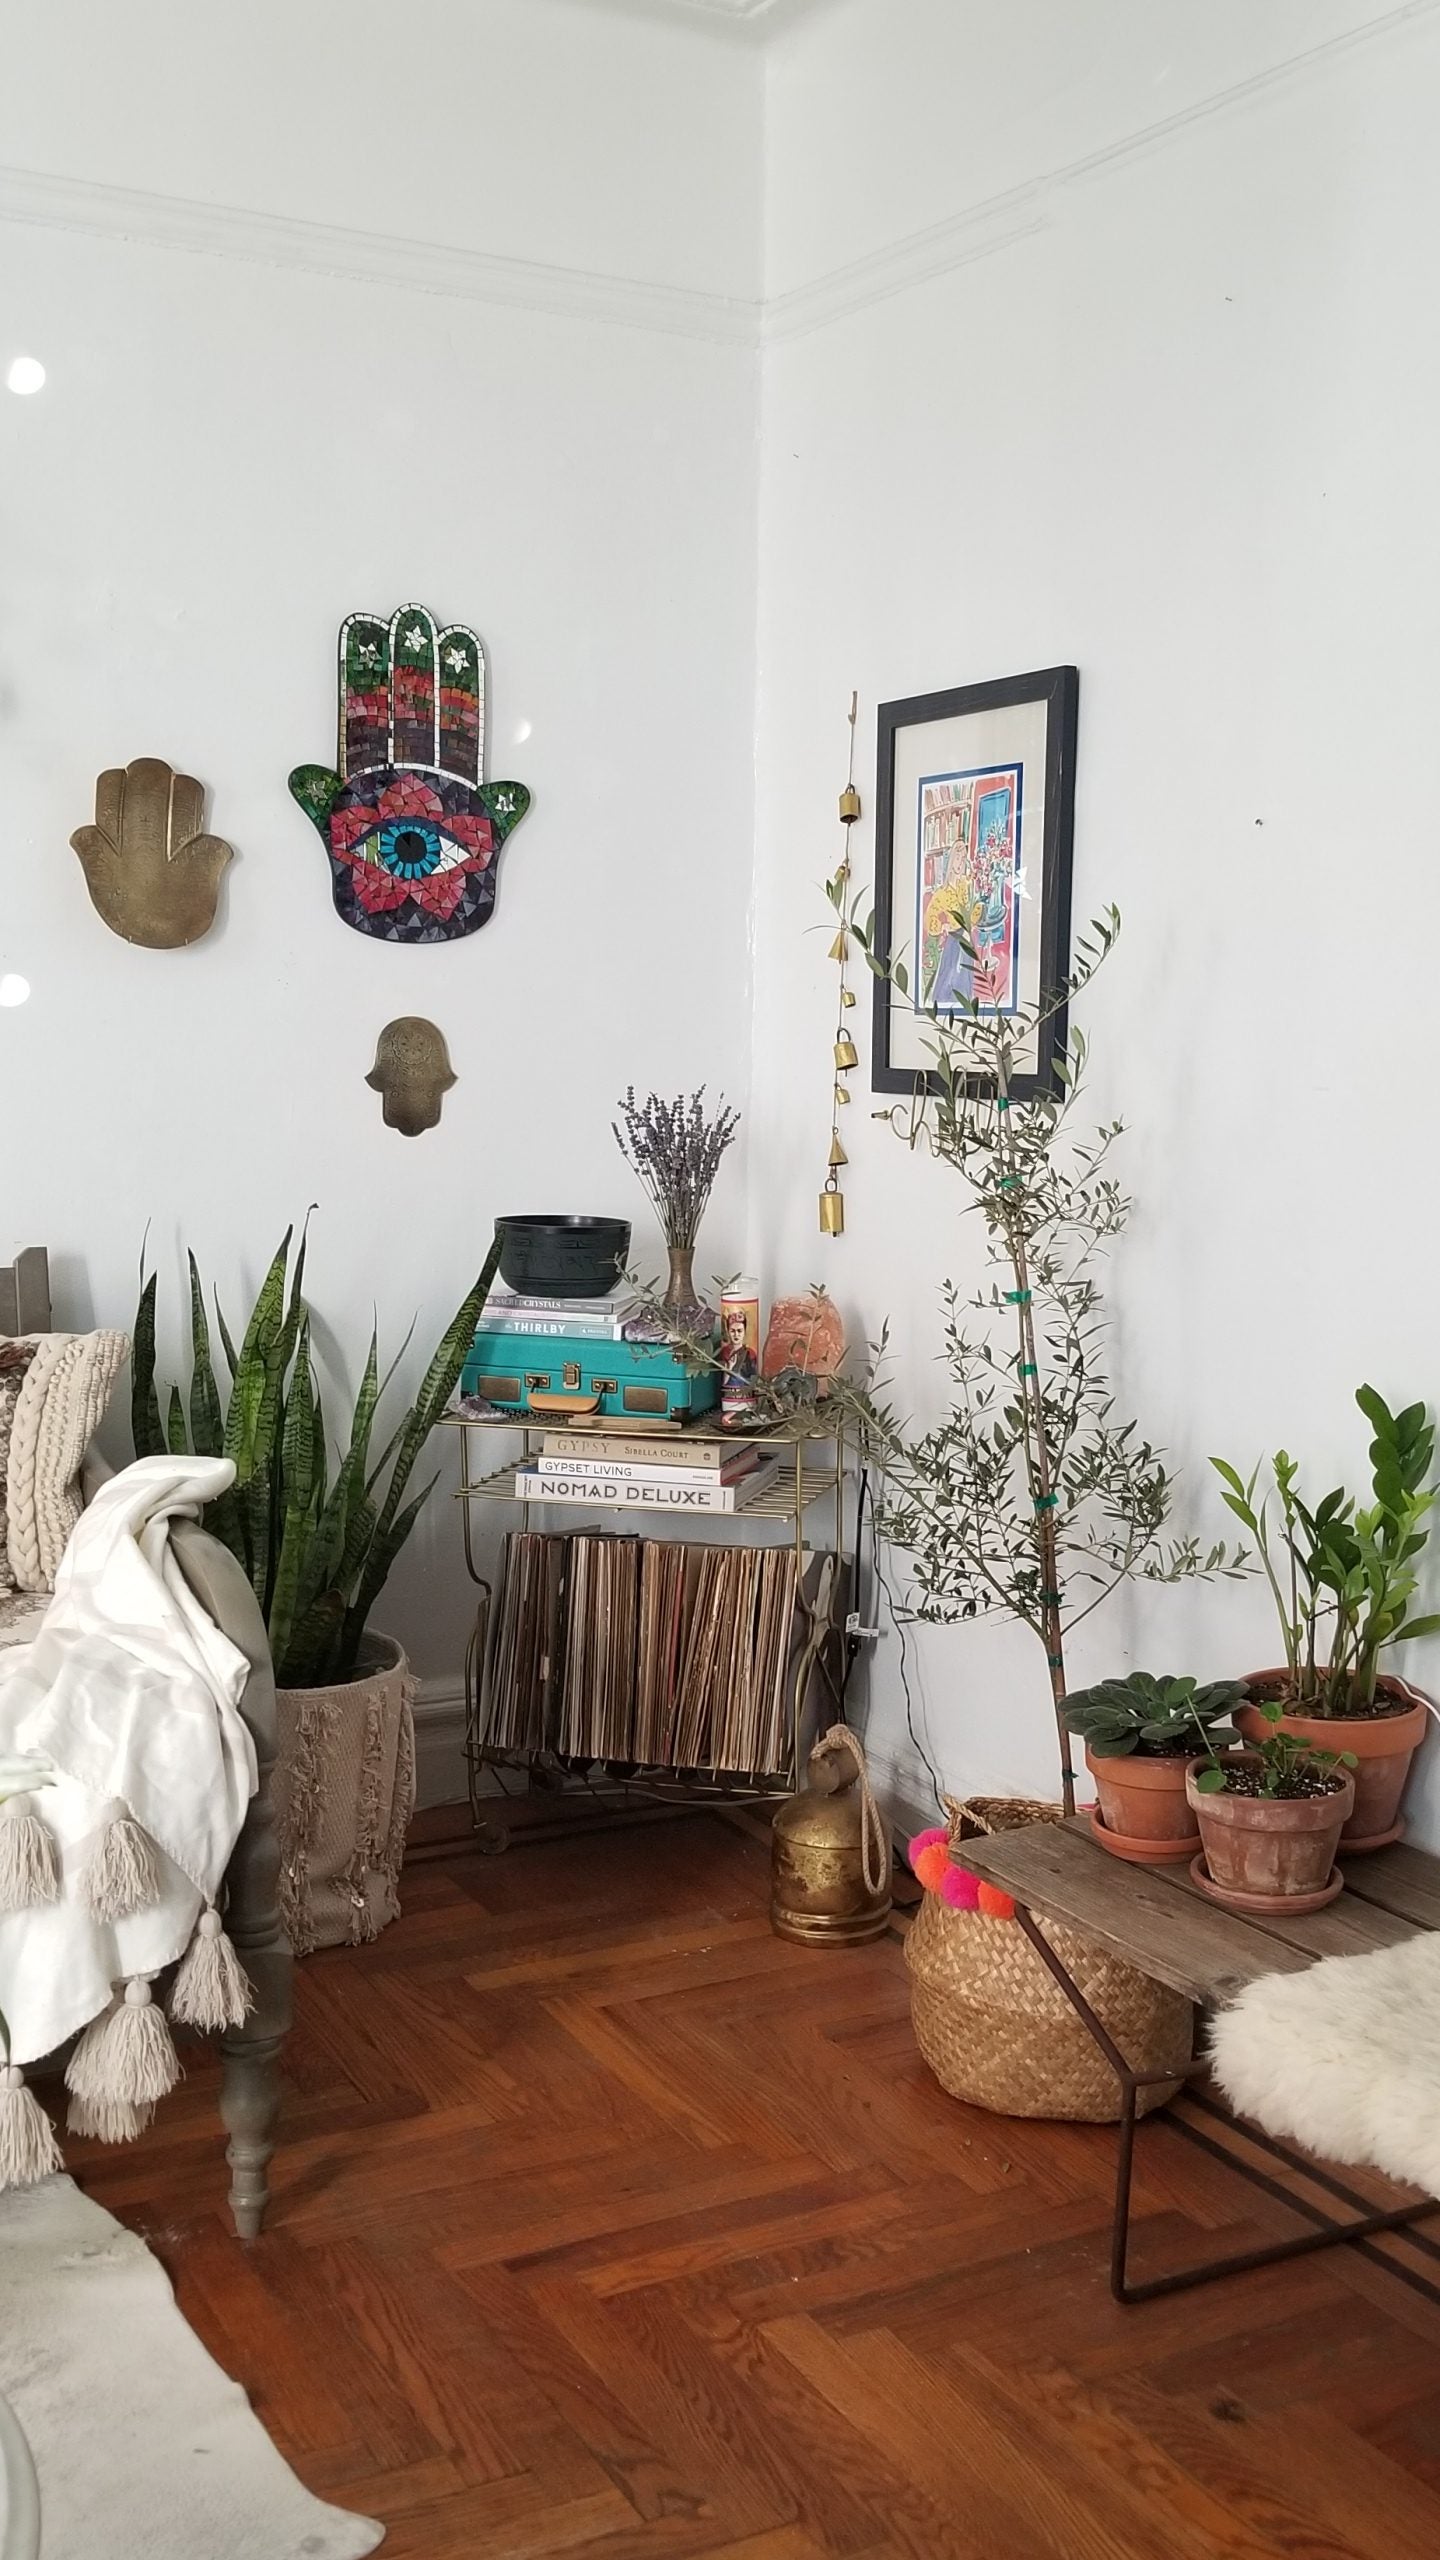 Record player and records with plants nearby